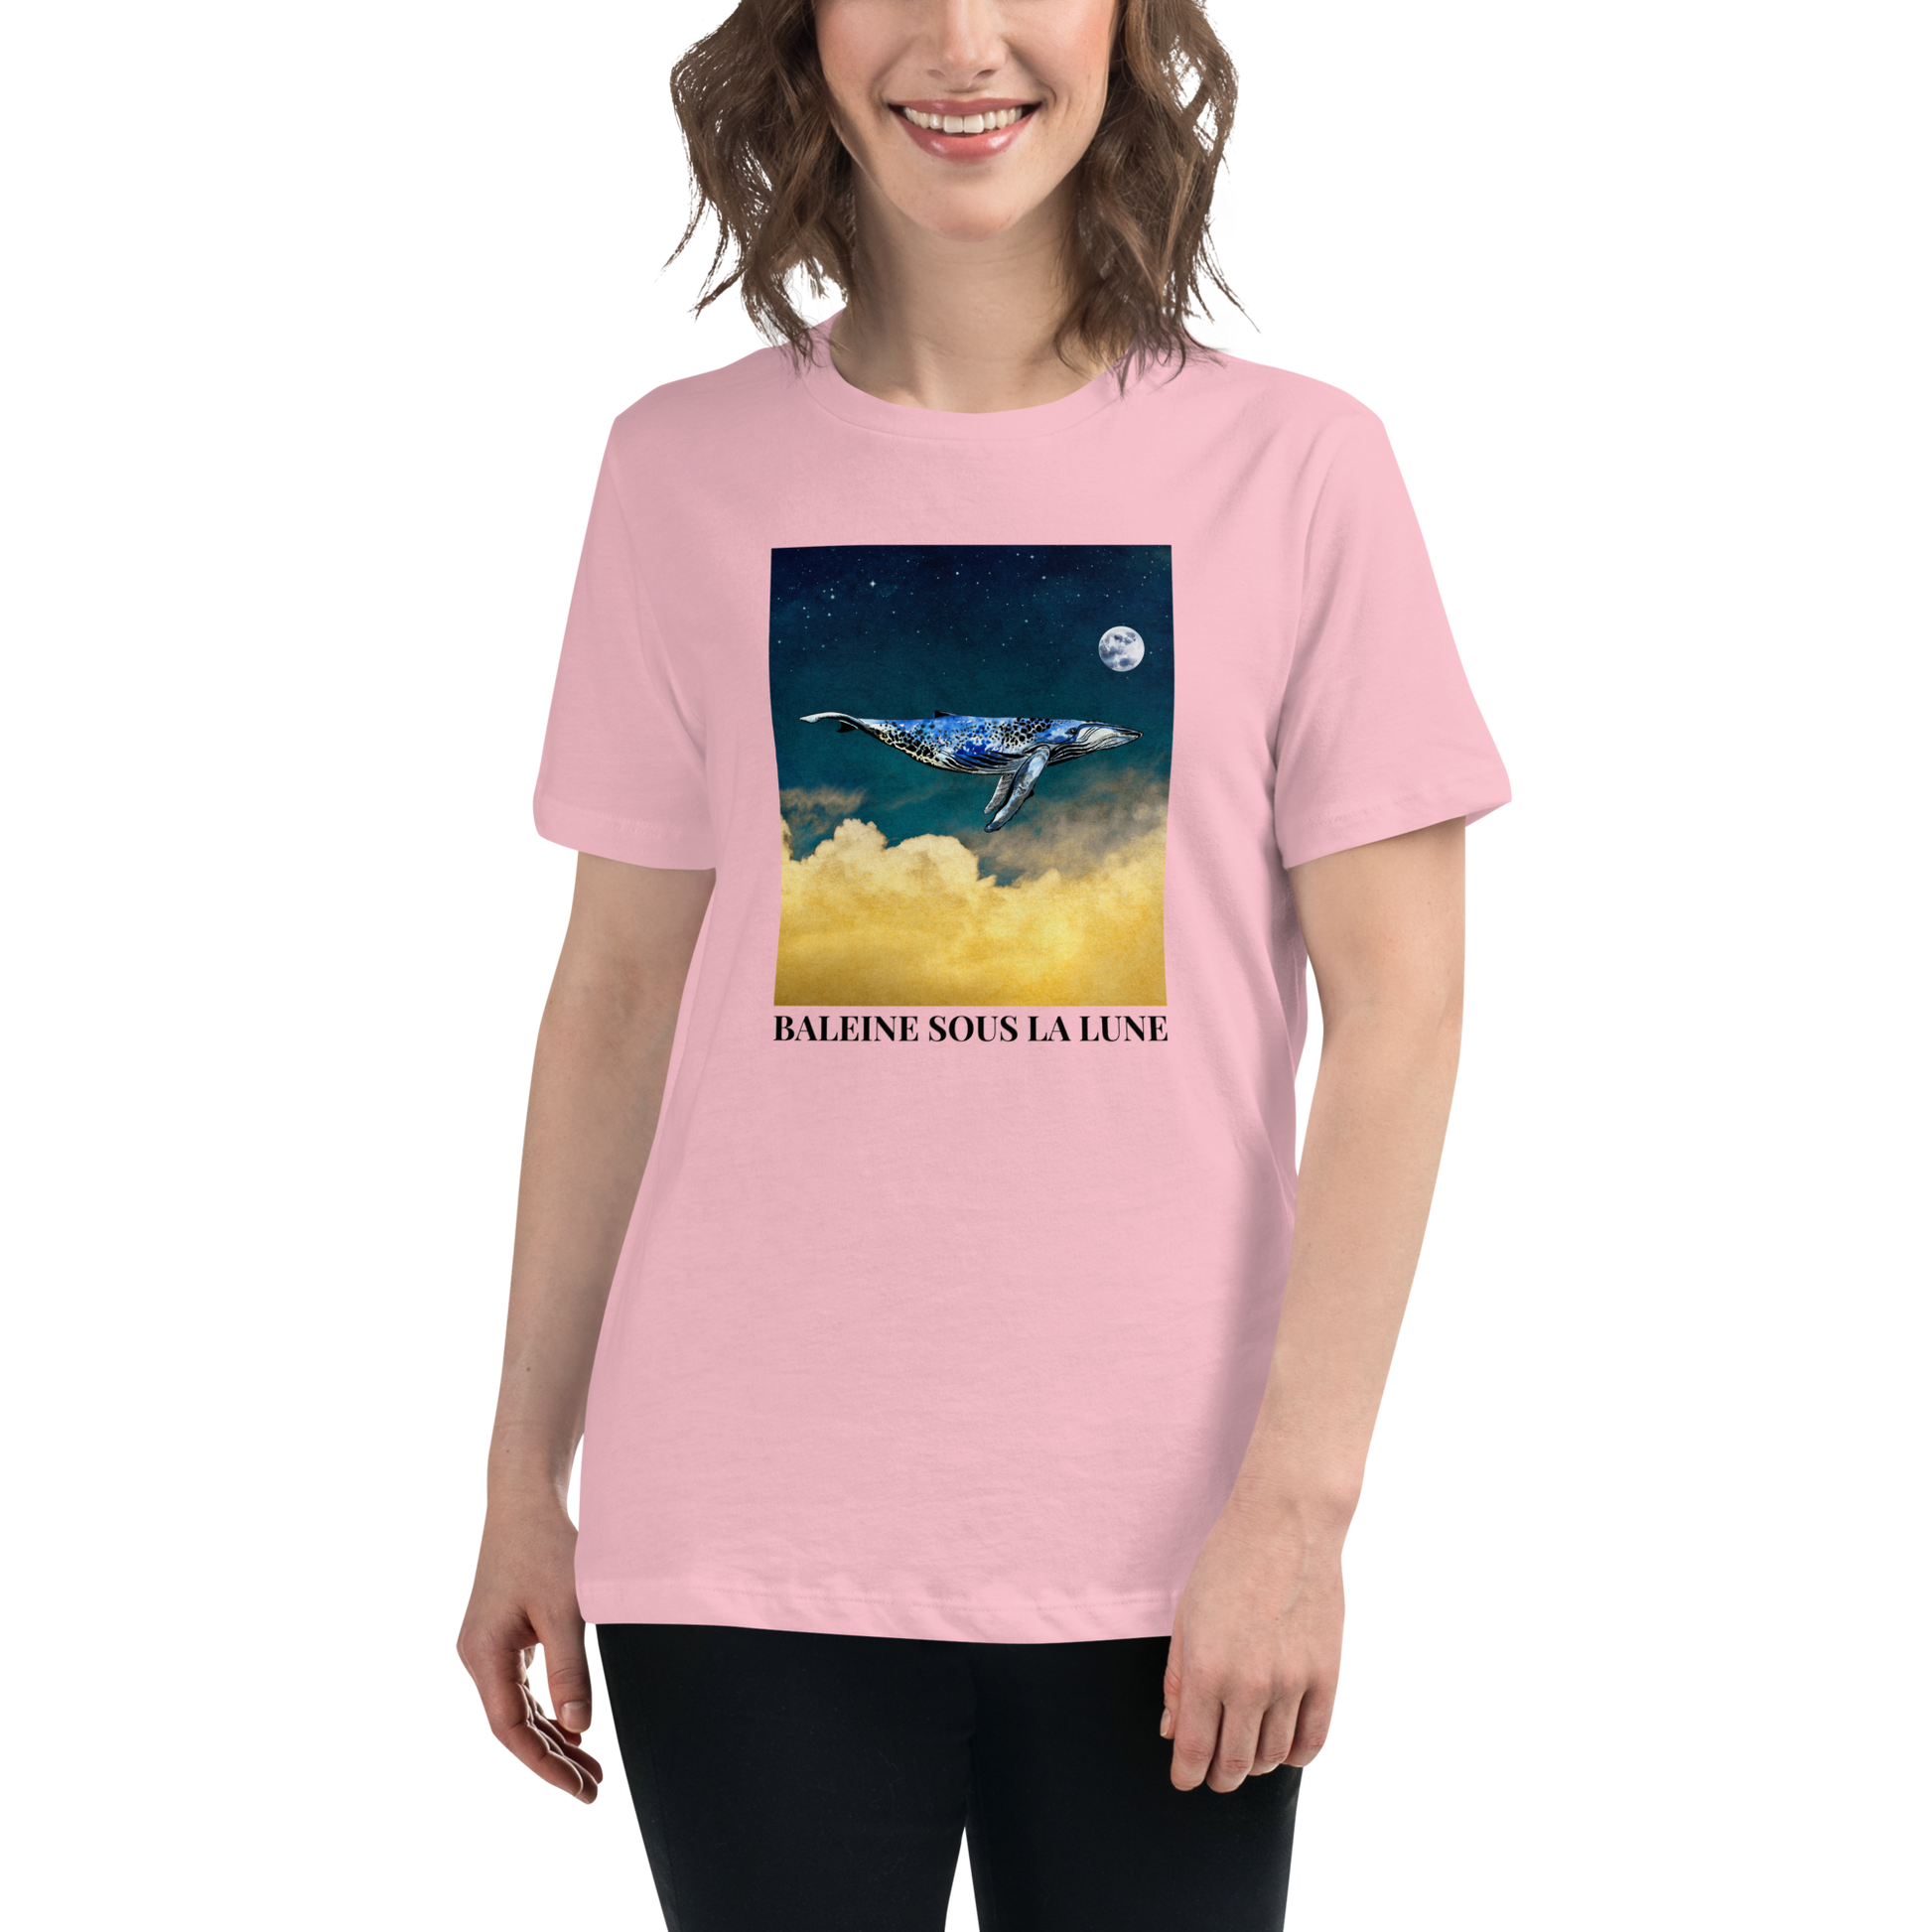 Smiling Woman Wearing a Women's relaxed pink whale t-shirt featuring a majestic Whale Under The Moon graphic on the chest - Women's Graphic Whale Tees - Boozy Fox